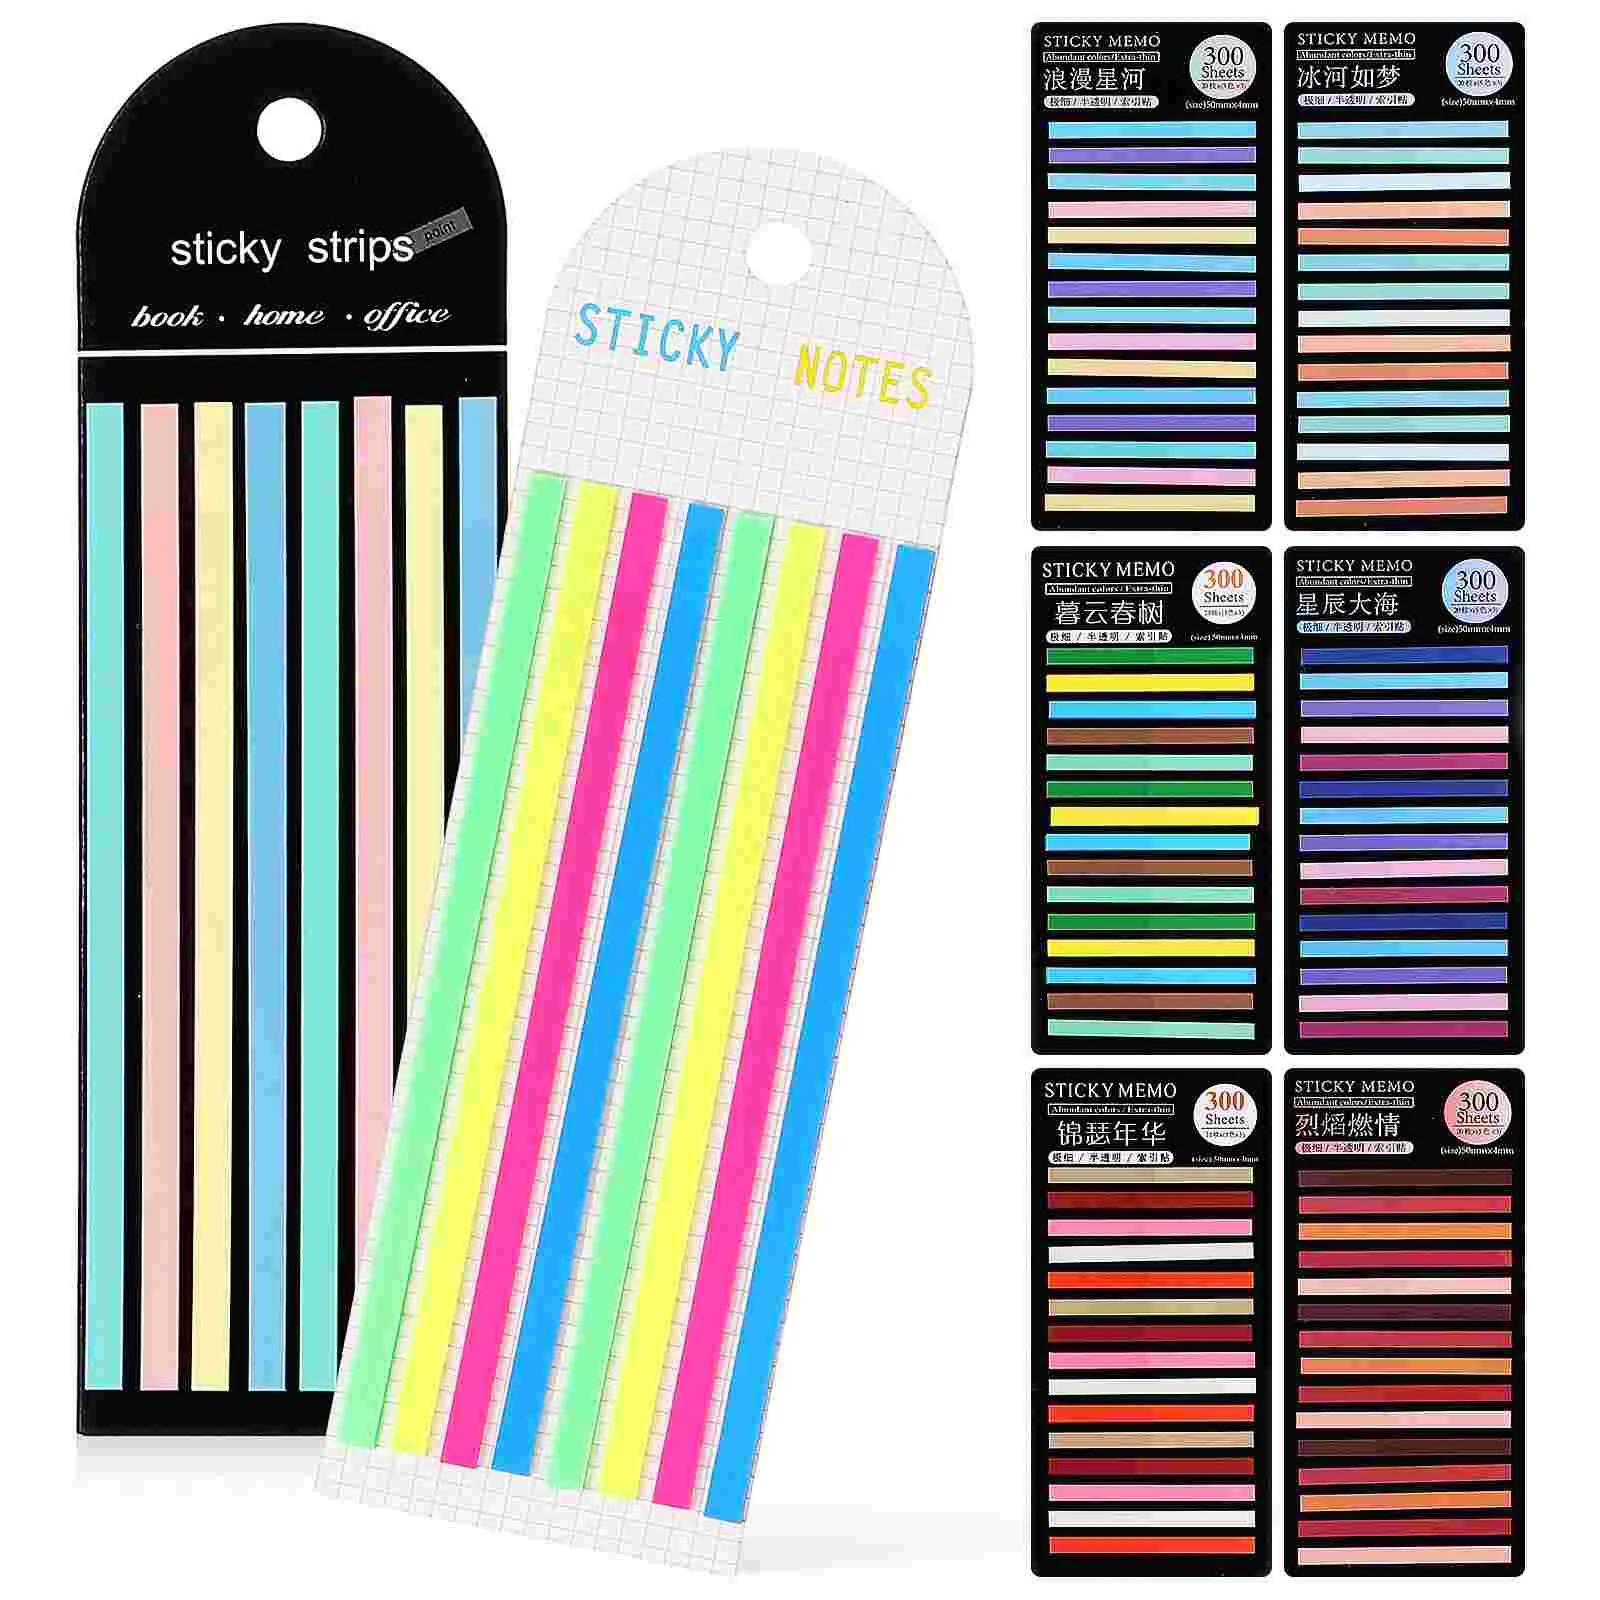 

8 Packs of Highlighter Tapes Fluorescence Highlight Strips Sticky Long Page Markers Tabs Study Supplies